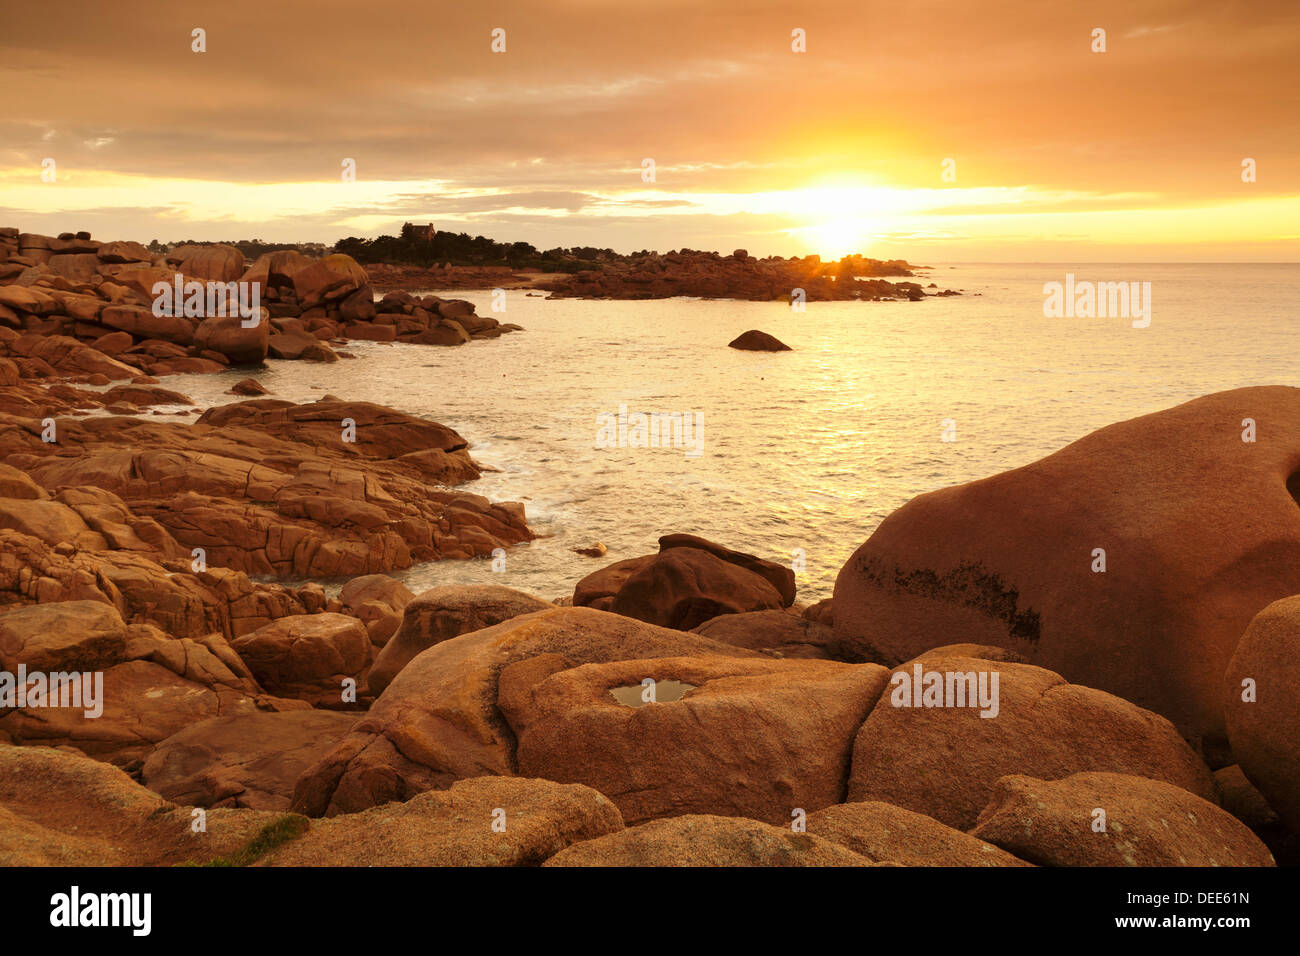 Rocks at the path Sentier des Douaniers on the Cote de Granit Rose at sunset, Cotes d'Armor, Brittany, France, Europe Stock Photo